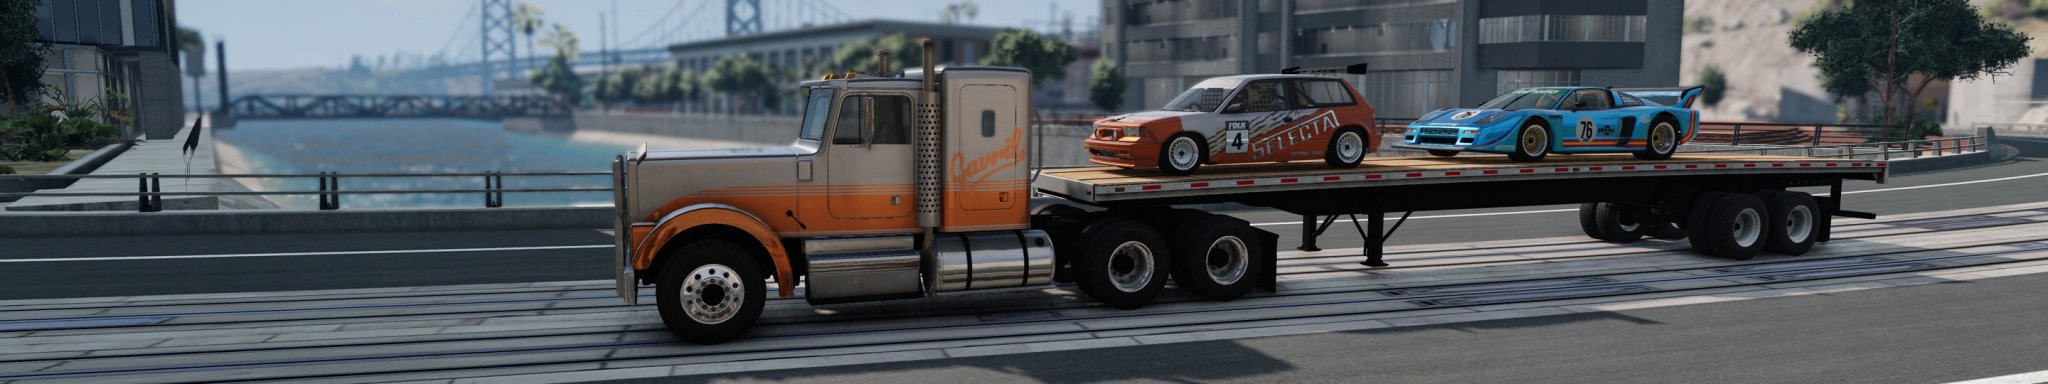 1 BeamNG RACE CAR and TRUCK TRANSPORTER copy.jpg